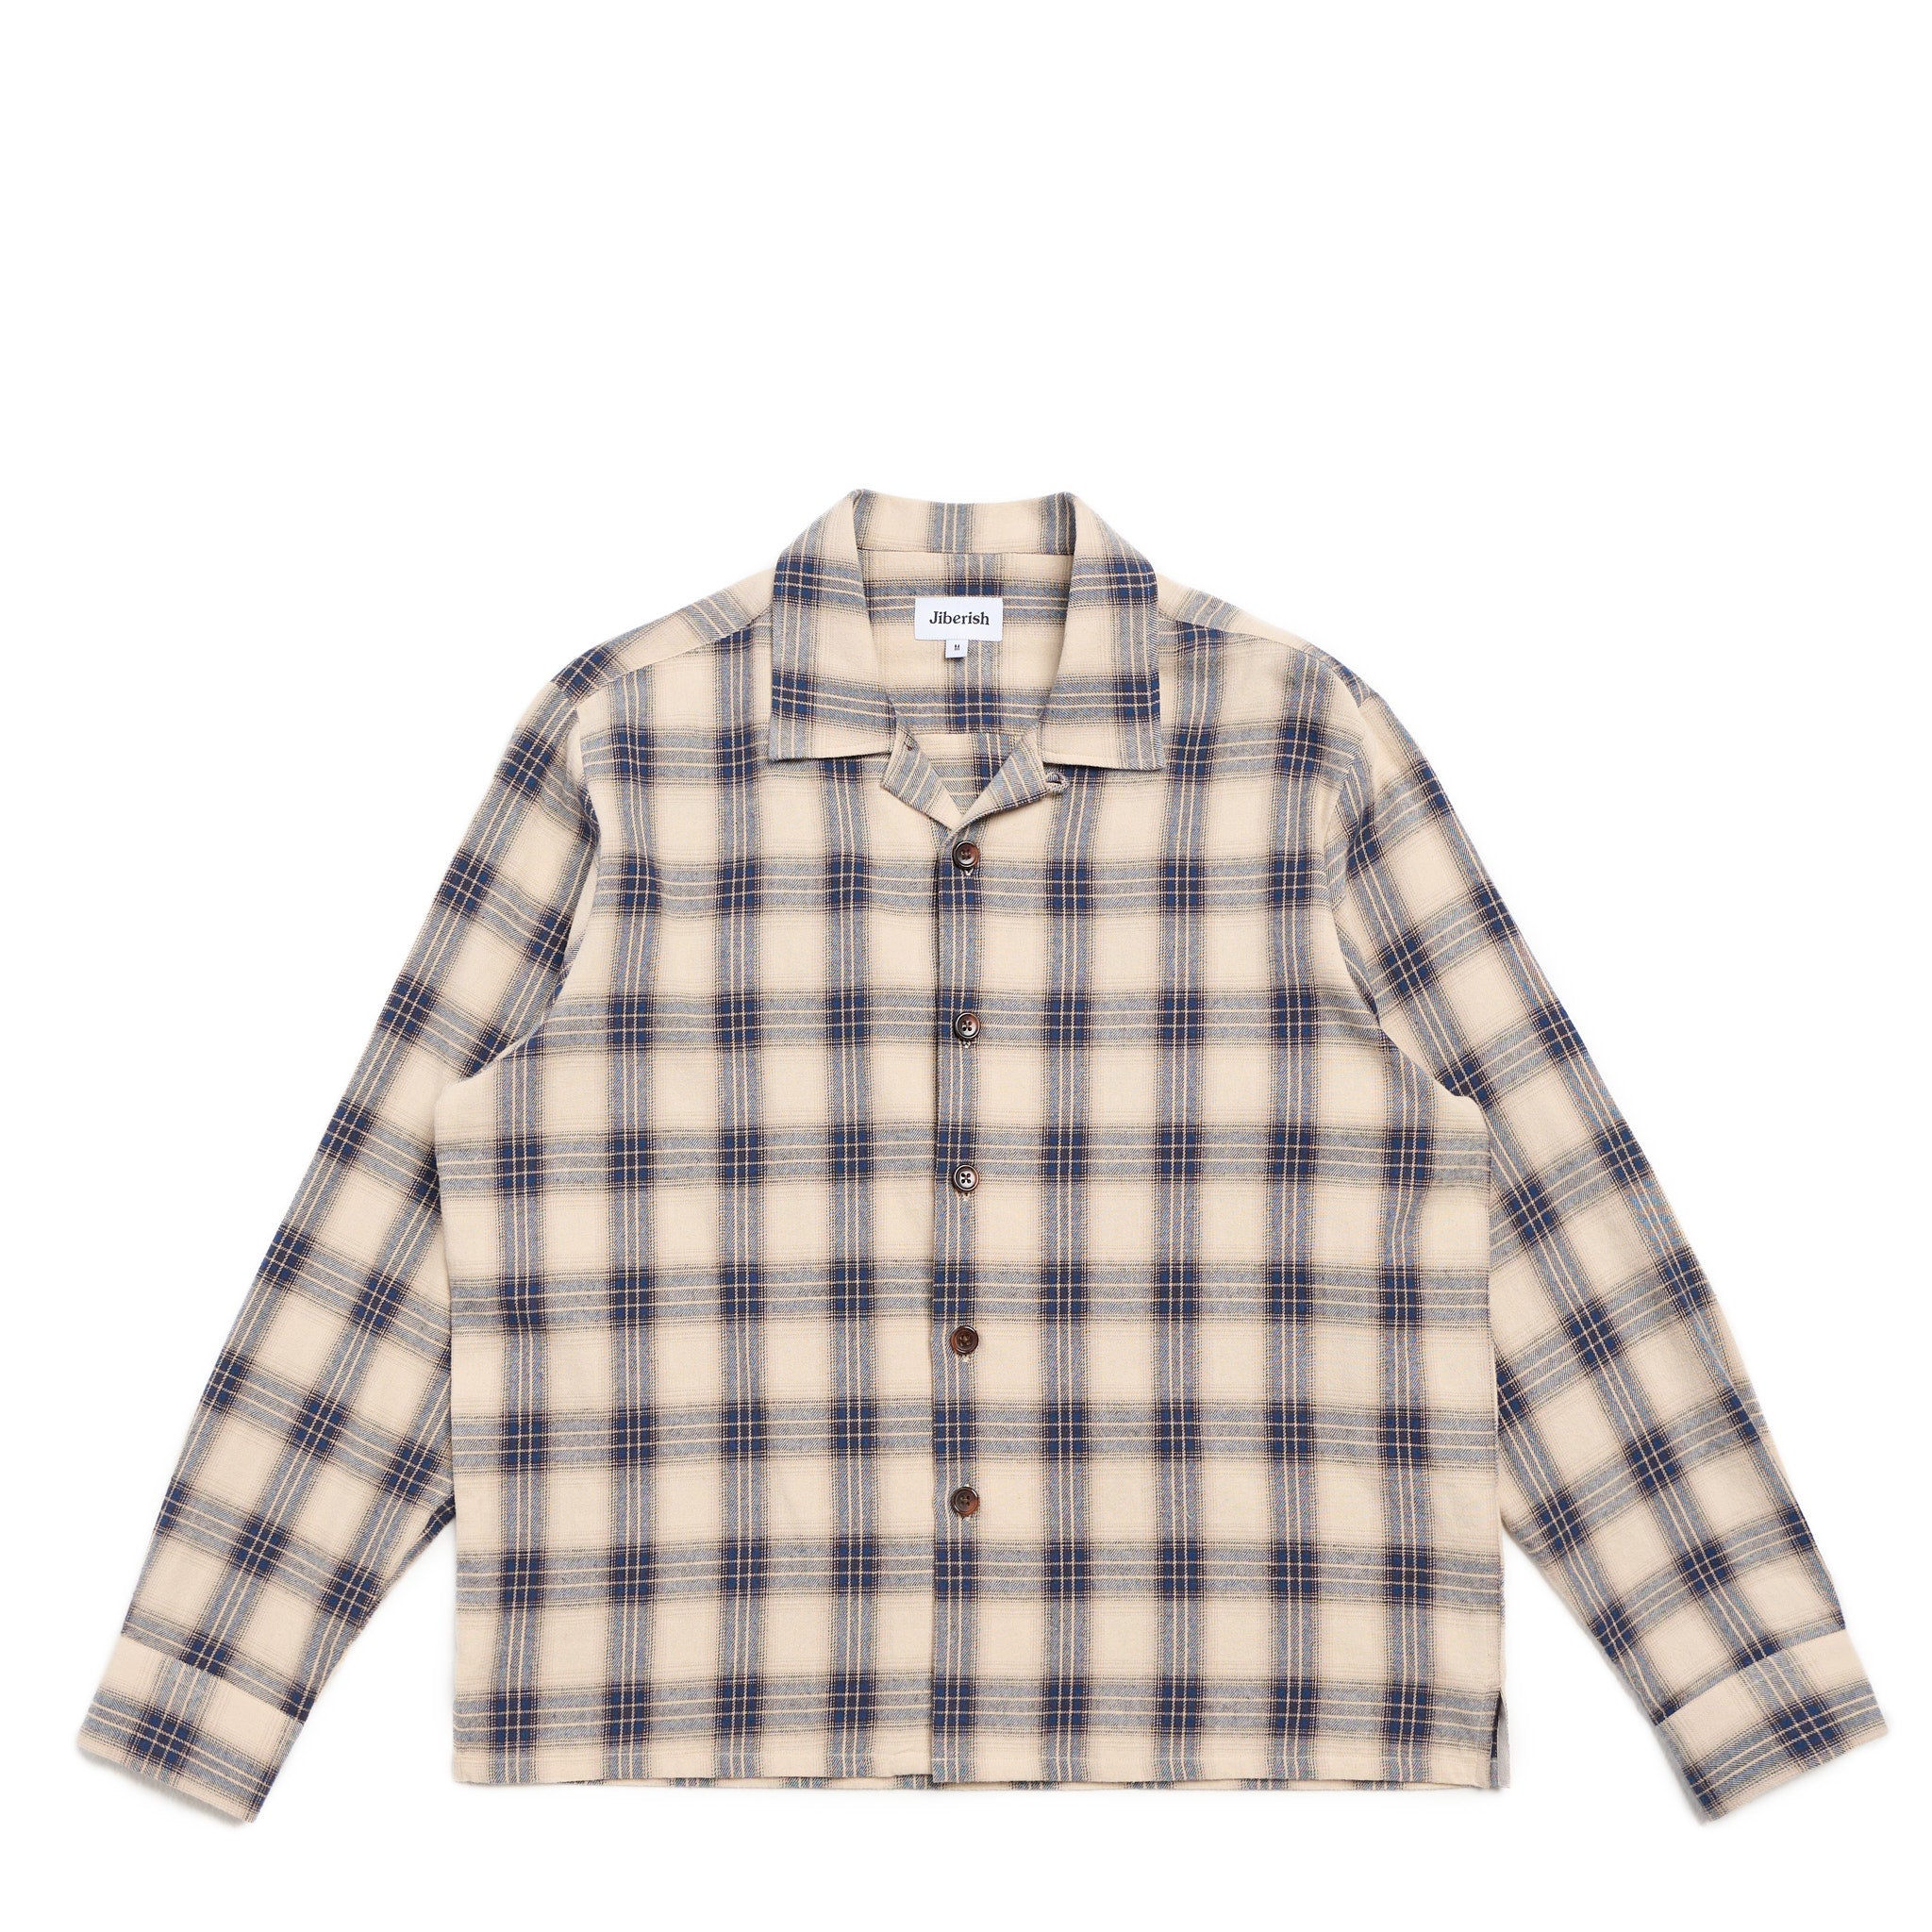 Cropped Open Collar Flannel Tan/Navy